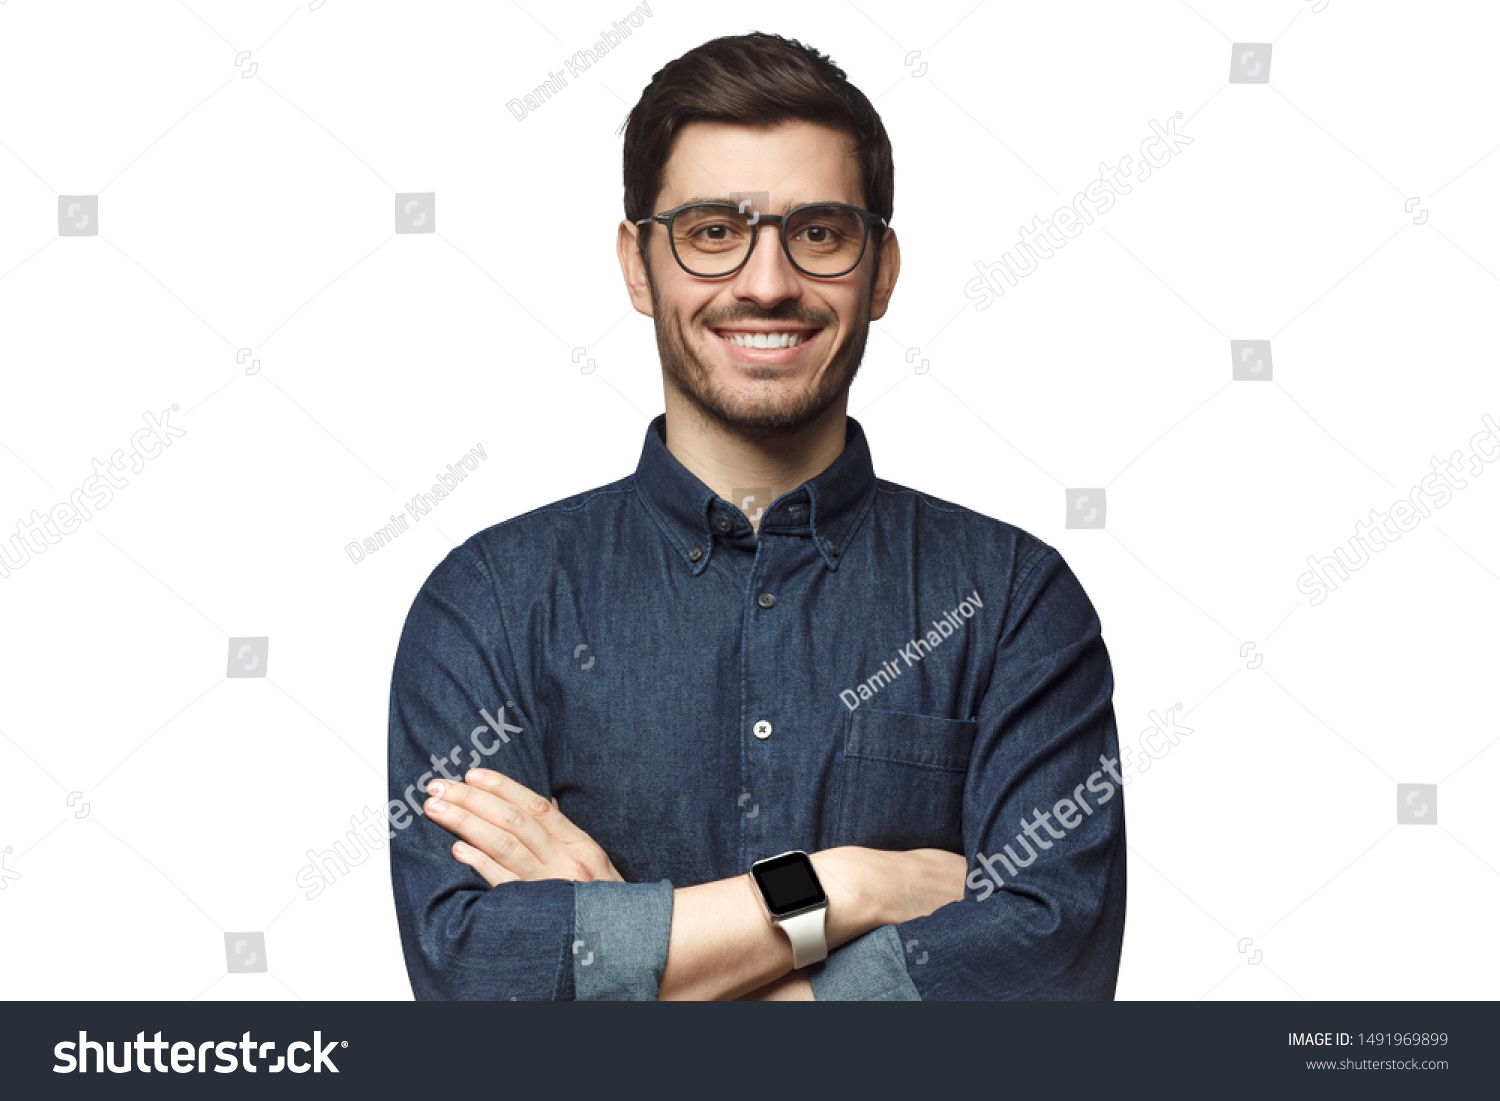 Portrait of young smiling caucasian man with crossed arms, wearing smart watch and casual denim shirt, isolated on white  #1491969899